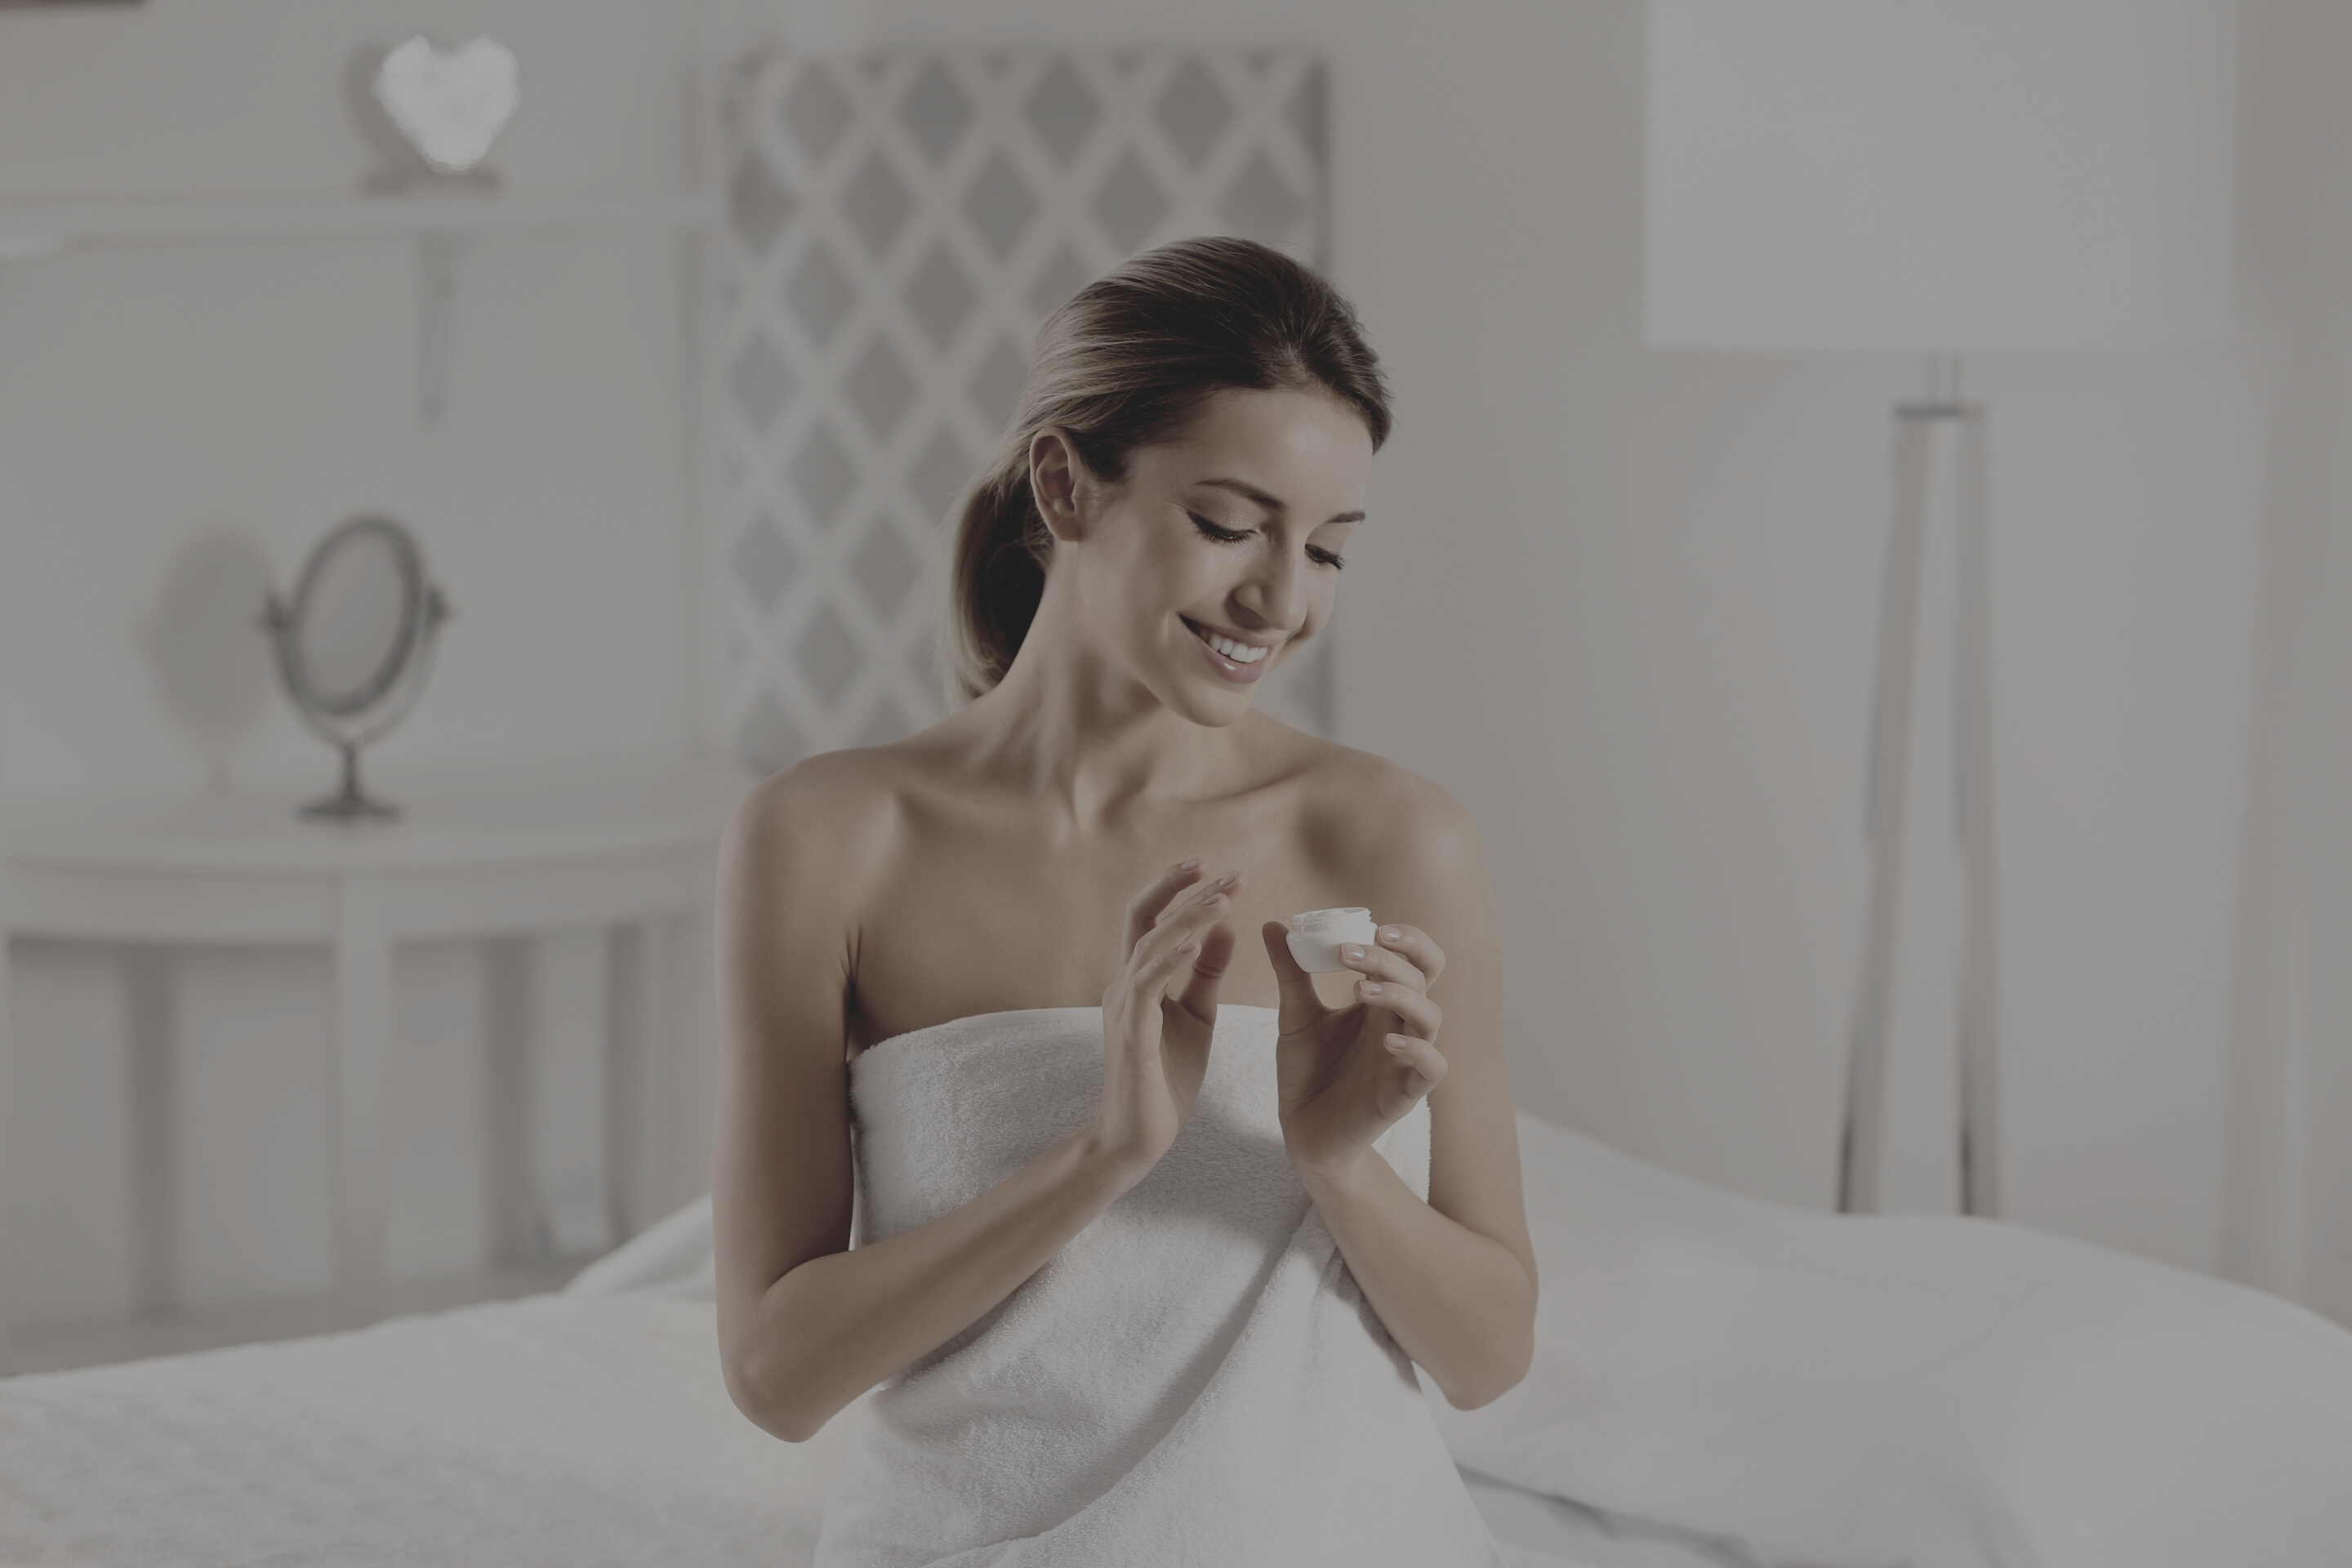 Woman Wearing a Towel Holding a Jar on the Bed